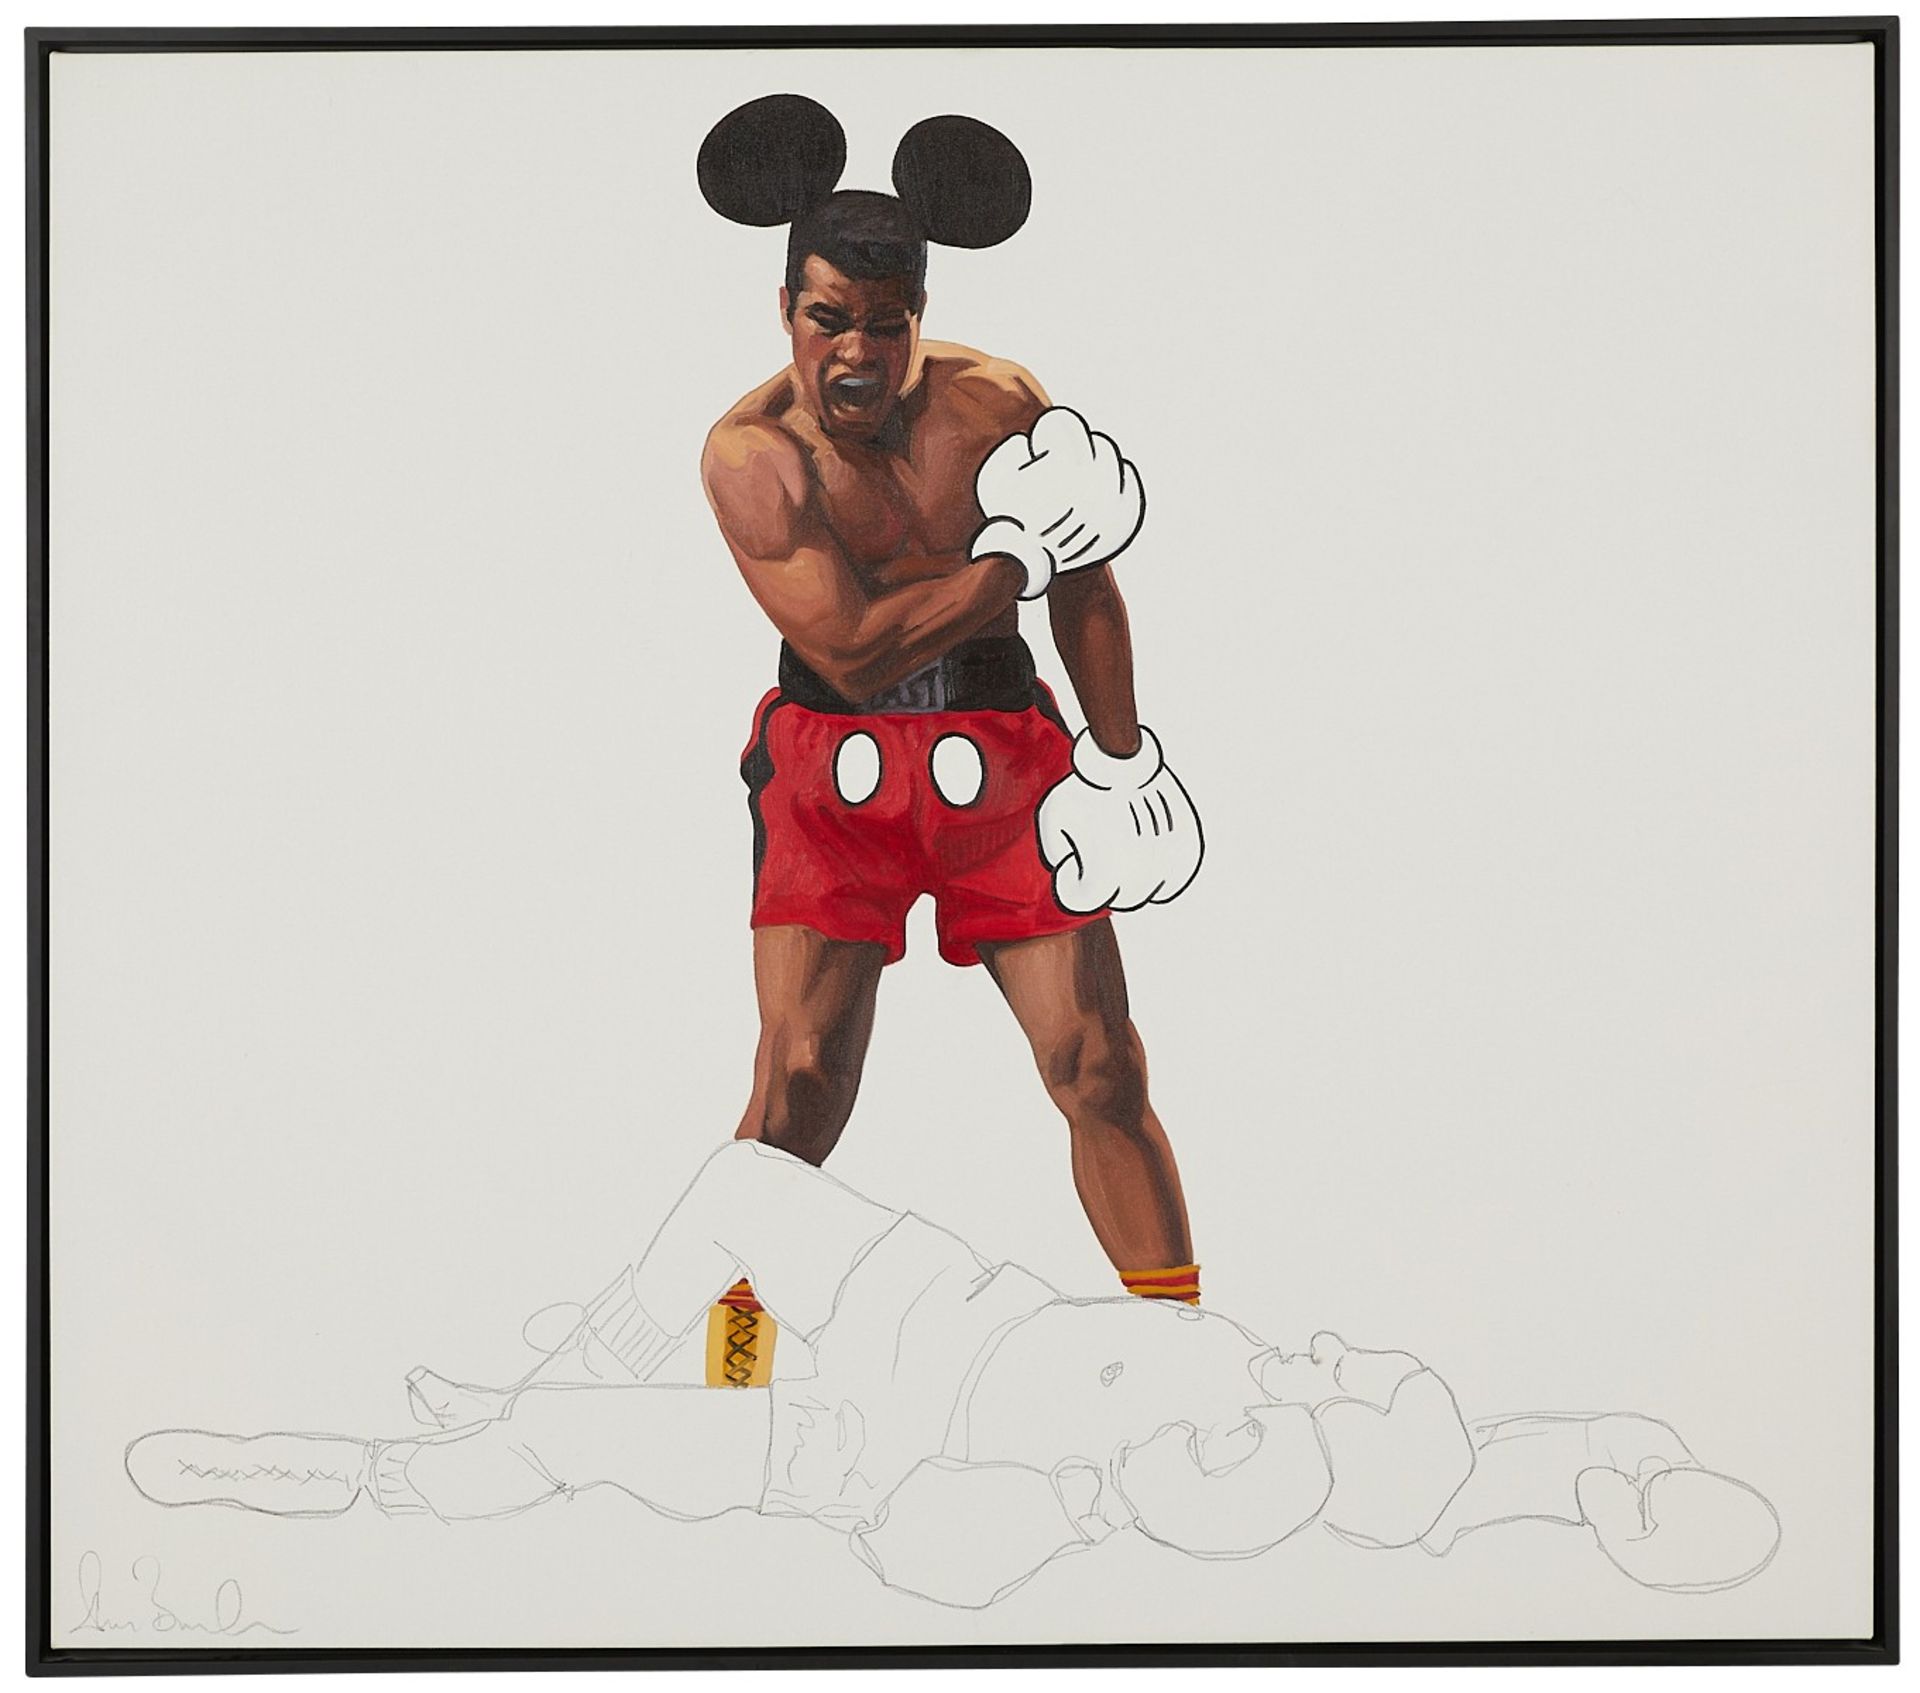 Shane Bowden "Ali Mouse" Painting - Image 3 of 7